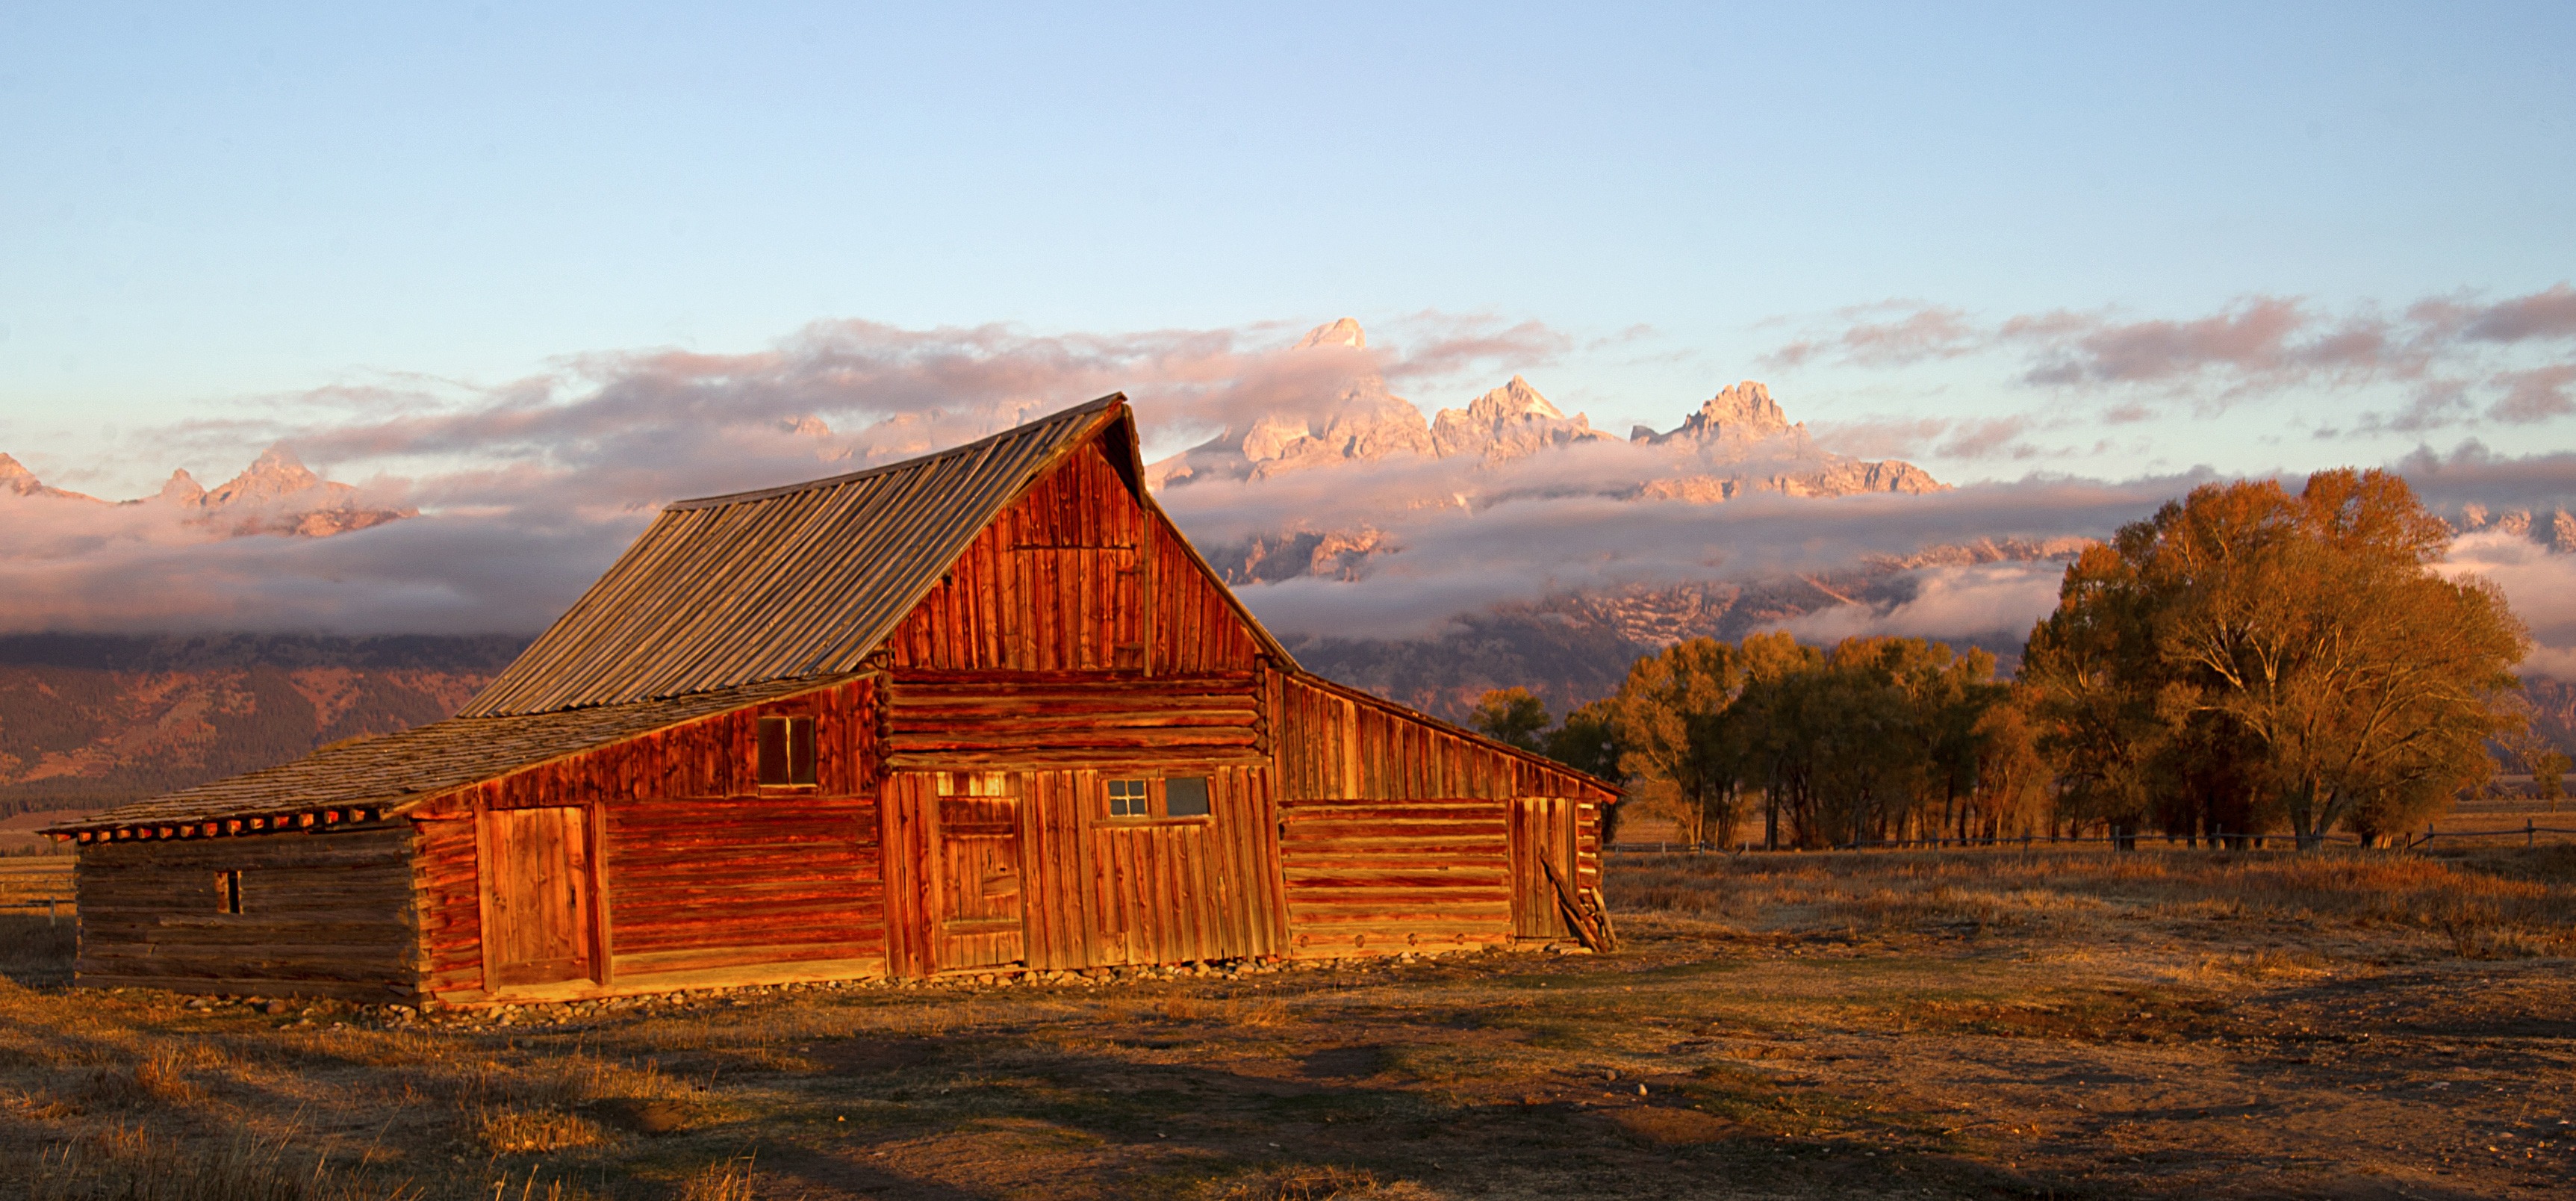 The sun hits the tips of the Grand Tetons behind the Moulton barn October 5, 2012 in the Grand Teton National Park in Wyoming. Grand Teton National Park is located in northwestern Wyoming. Approximately 310,000 acres (130,000 ha) in size, the park includes the major peaks of the 40-mile (64 km) long Teton Range as well as most of the northern sections of the valley known as Jackson Hole. AFP PHOTO/Karen BLEIER        (Photo credit should read KAREN BLEIER/AFP/Getty Images) (Karen Bleier—Getty Images)